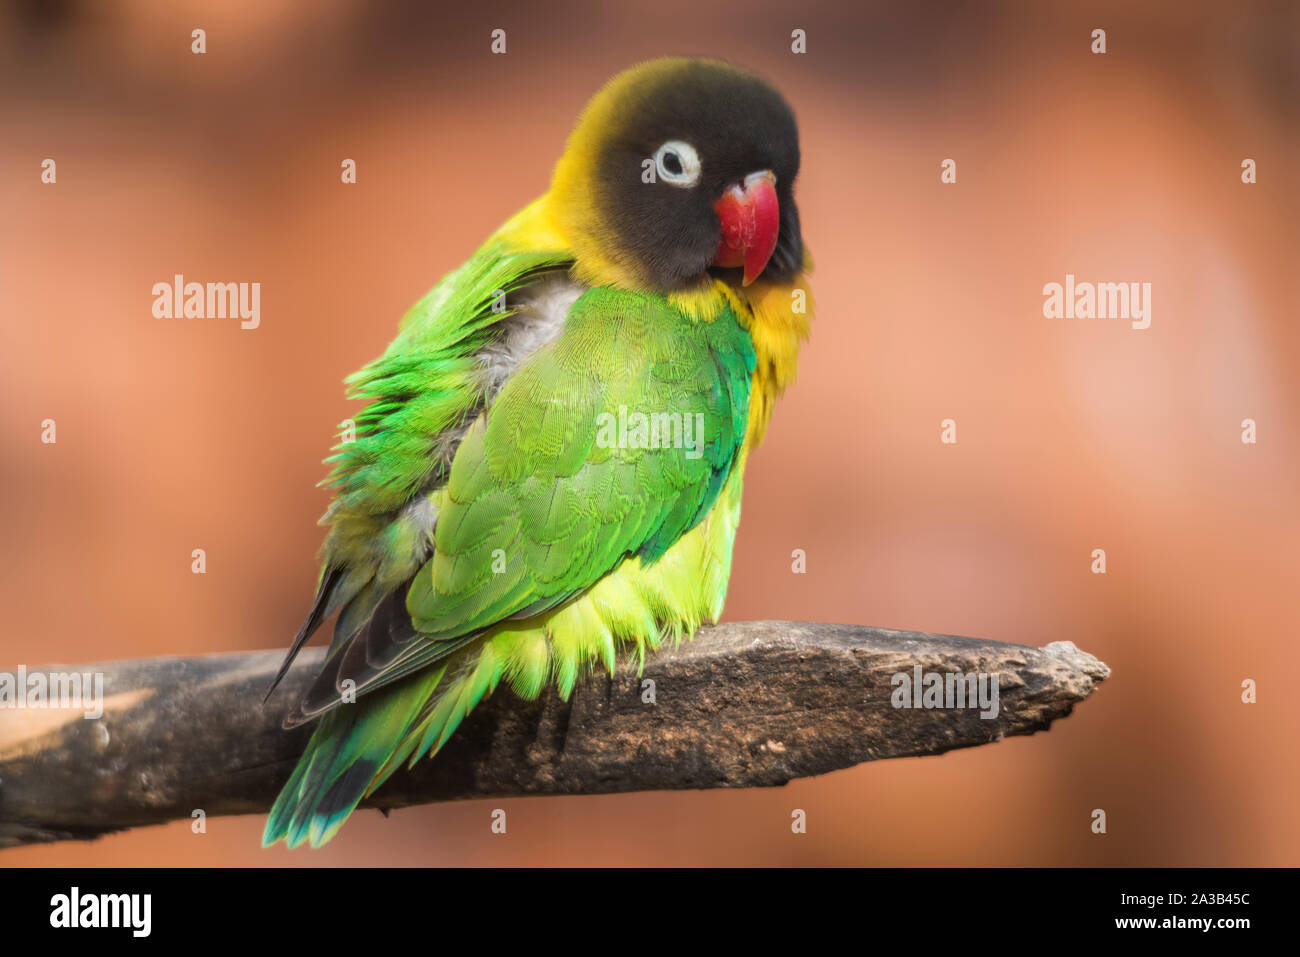 Yellow-collared lovebird on a branch Stock Photo